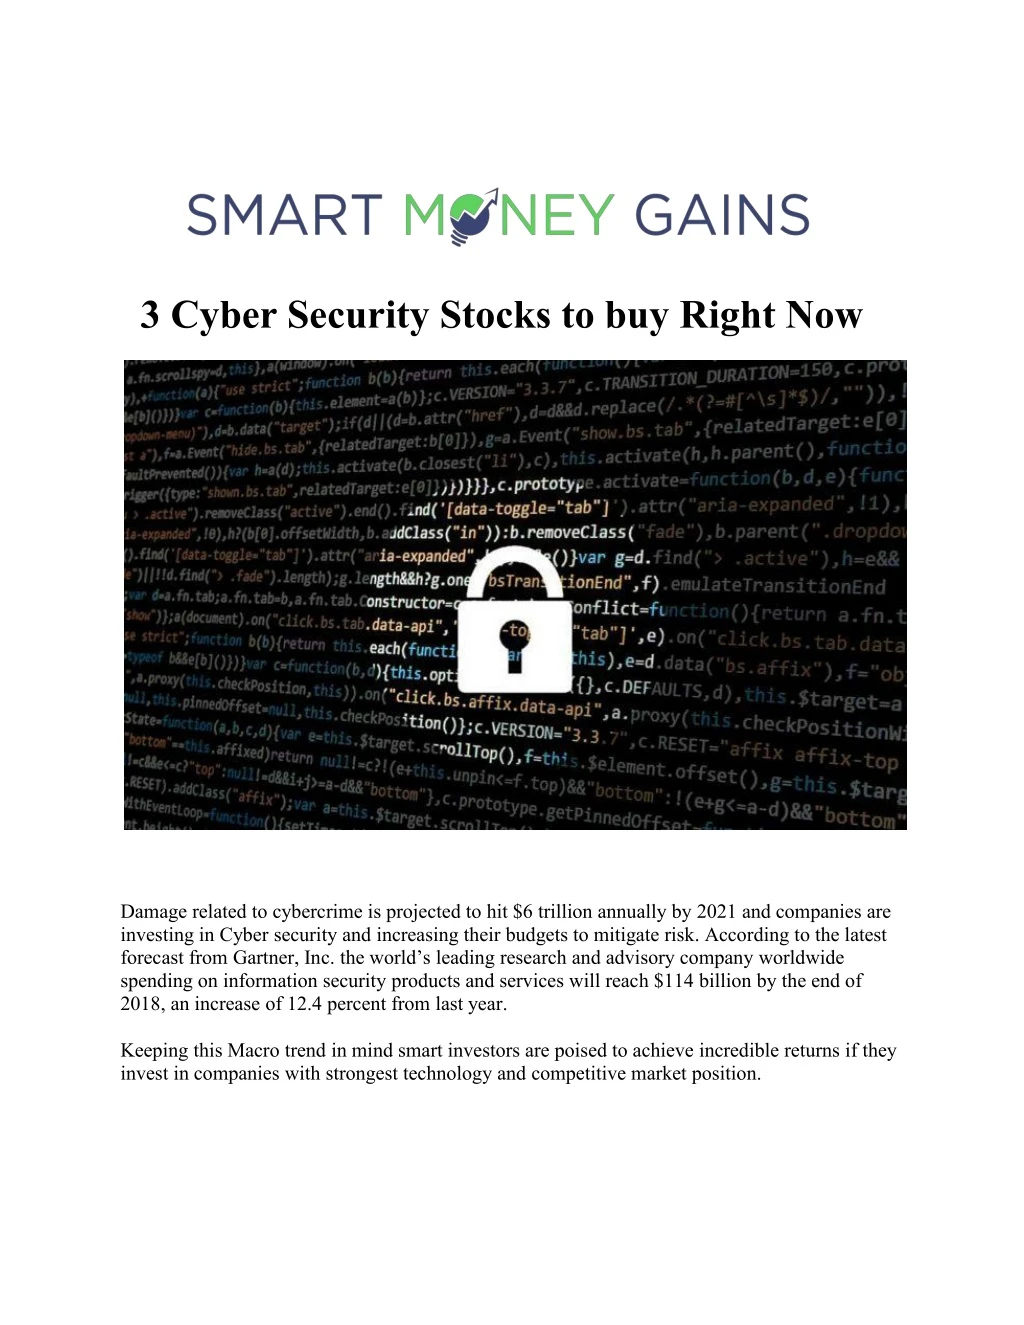 3 cyber security stocks to buy right now